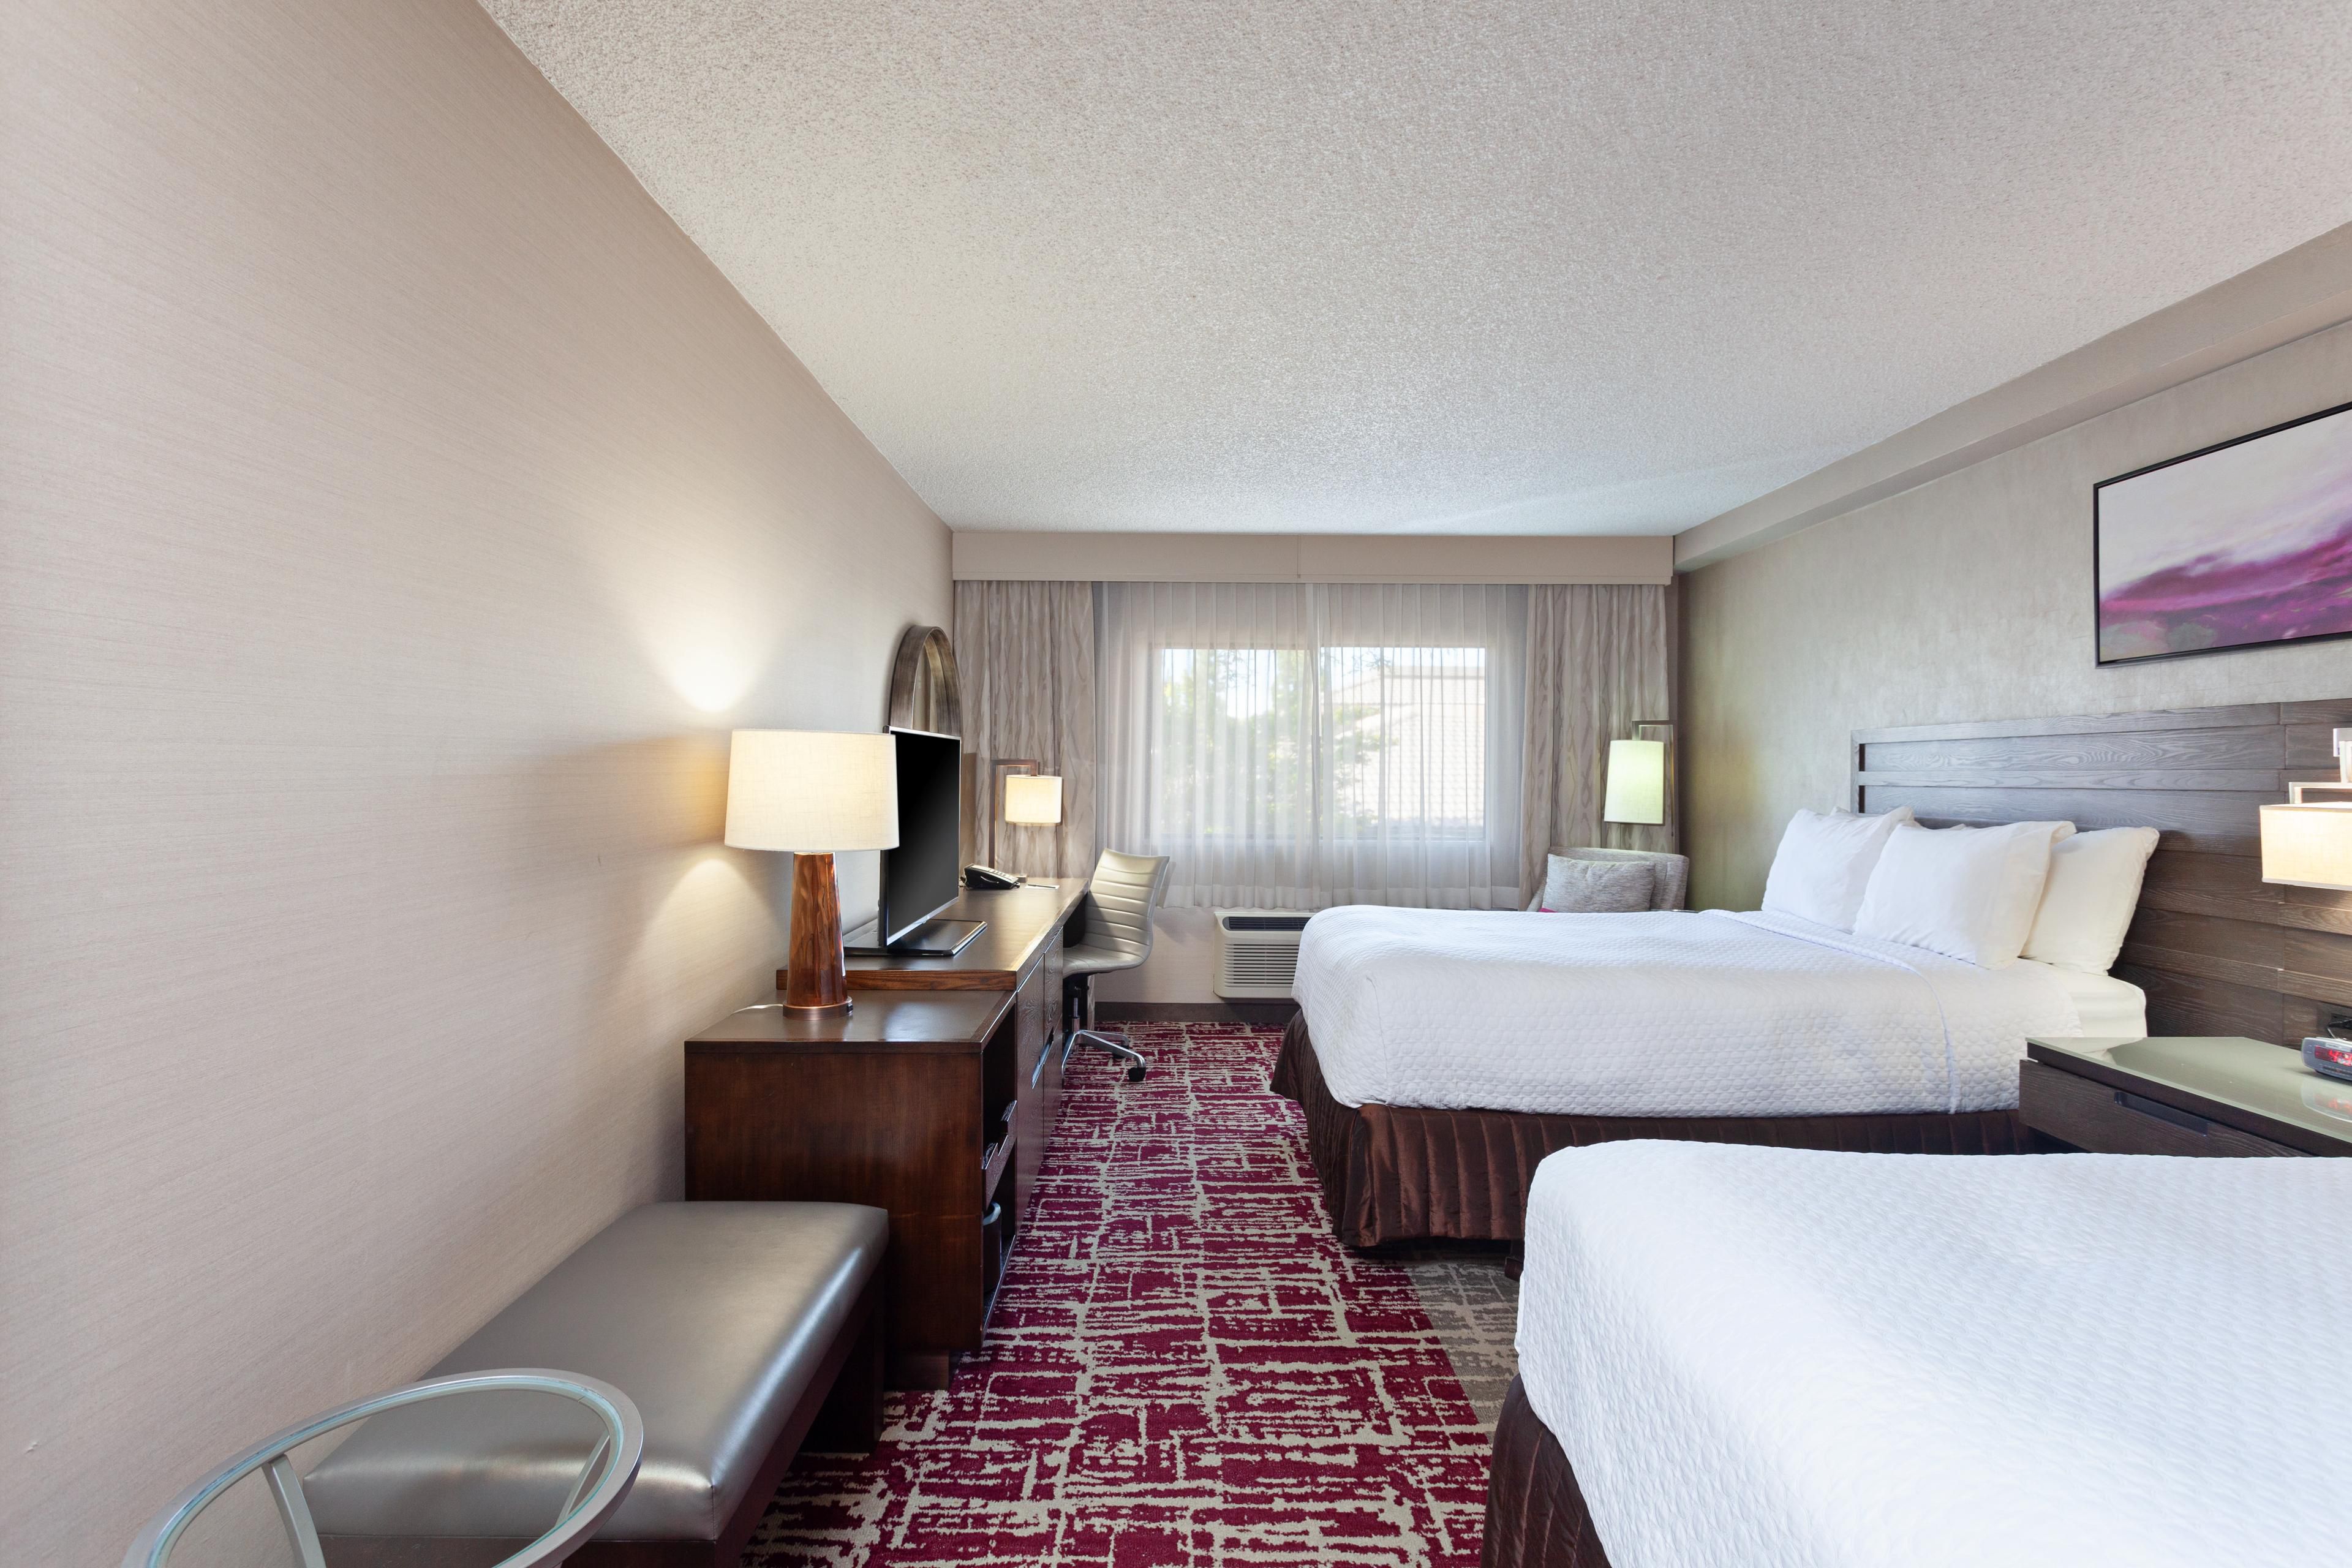 Indulge yourself in our warm, welcoming double bed room